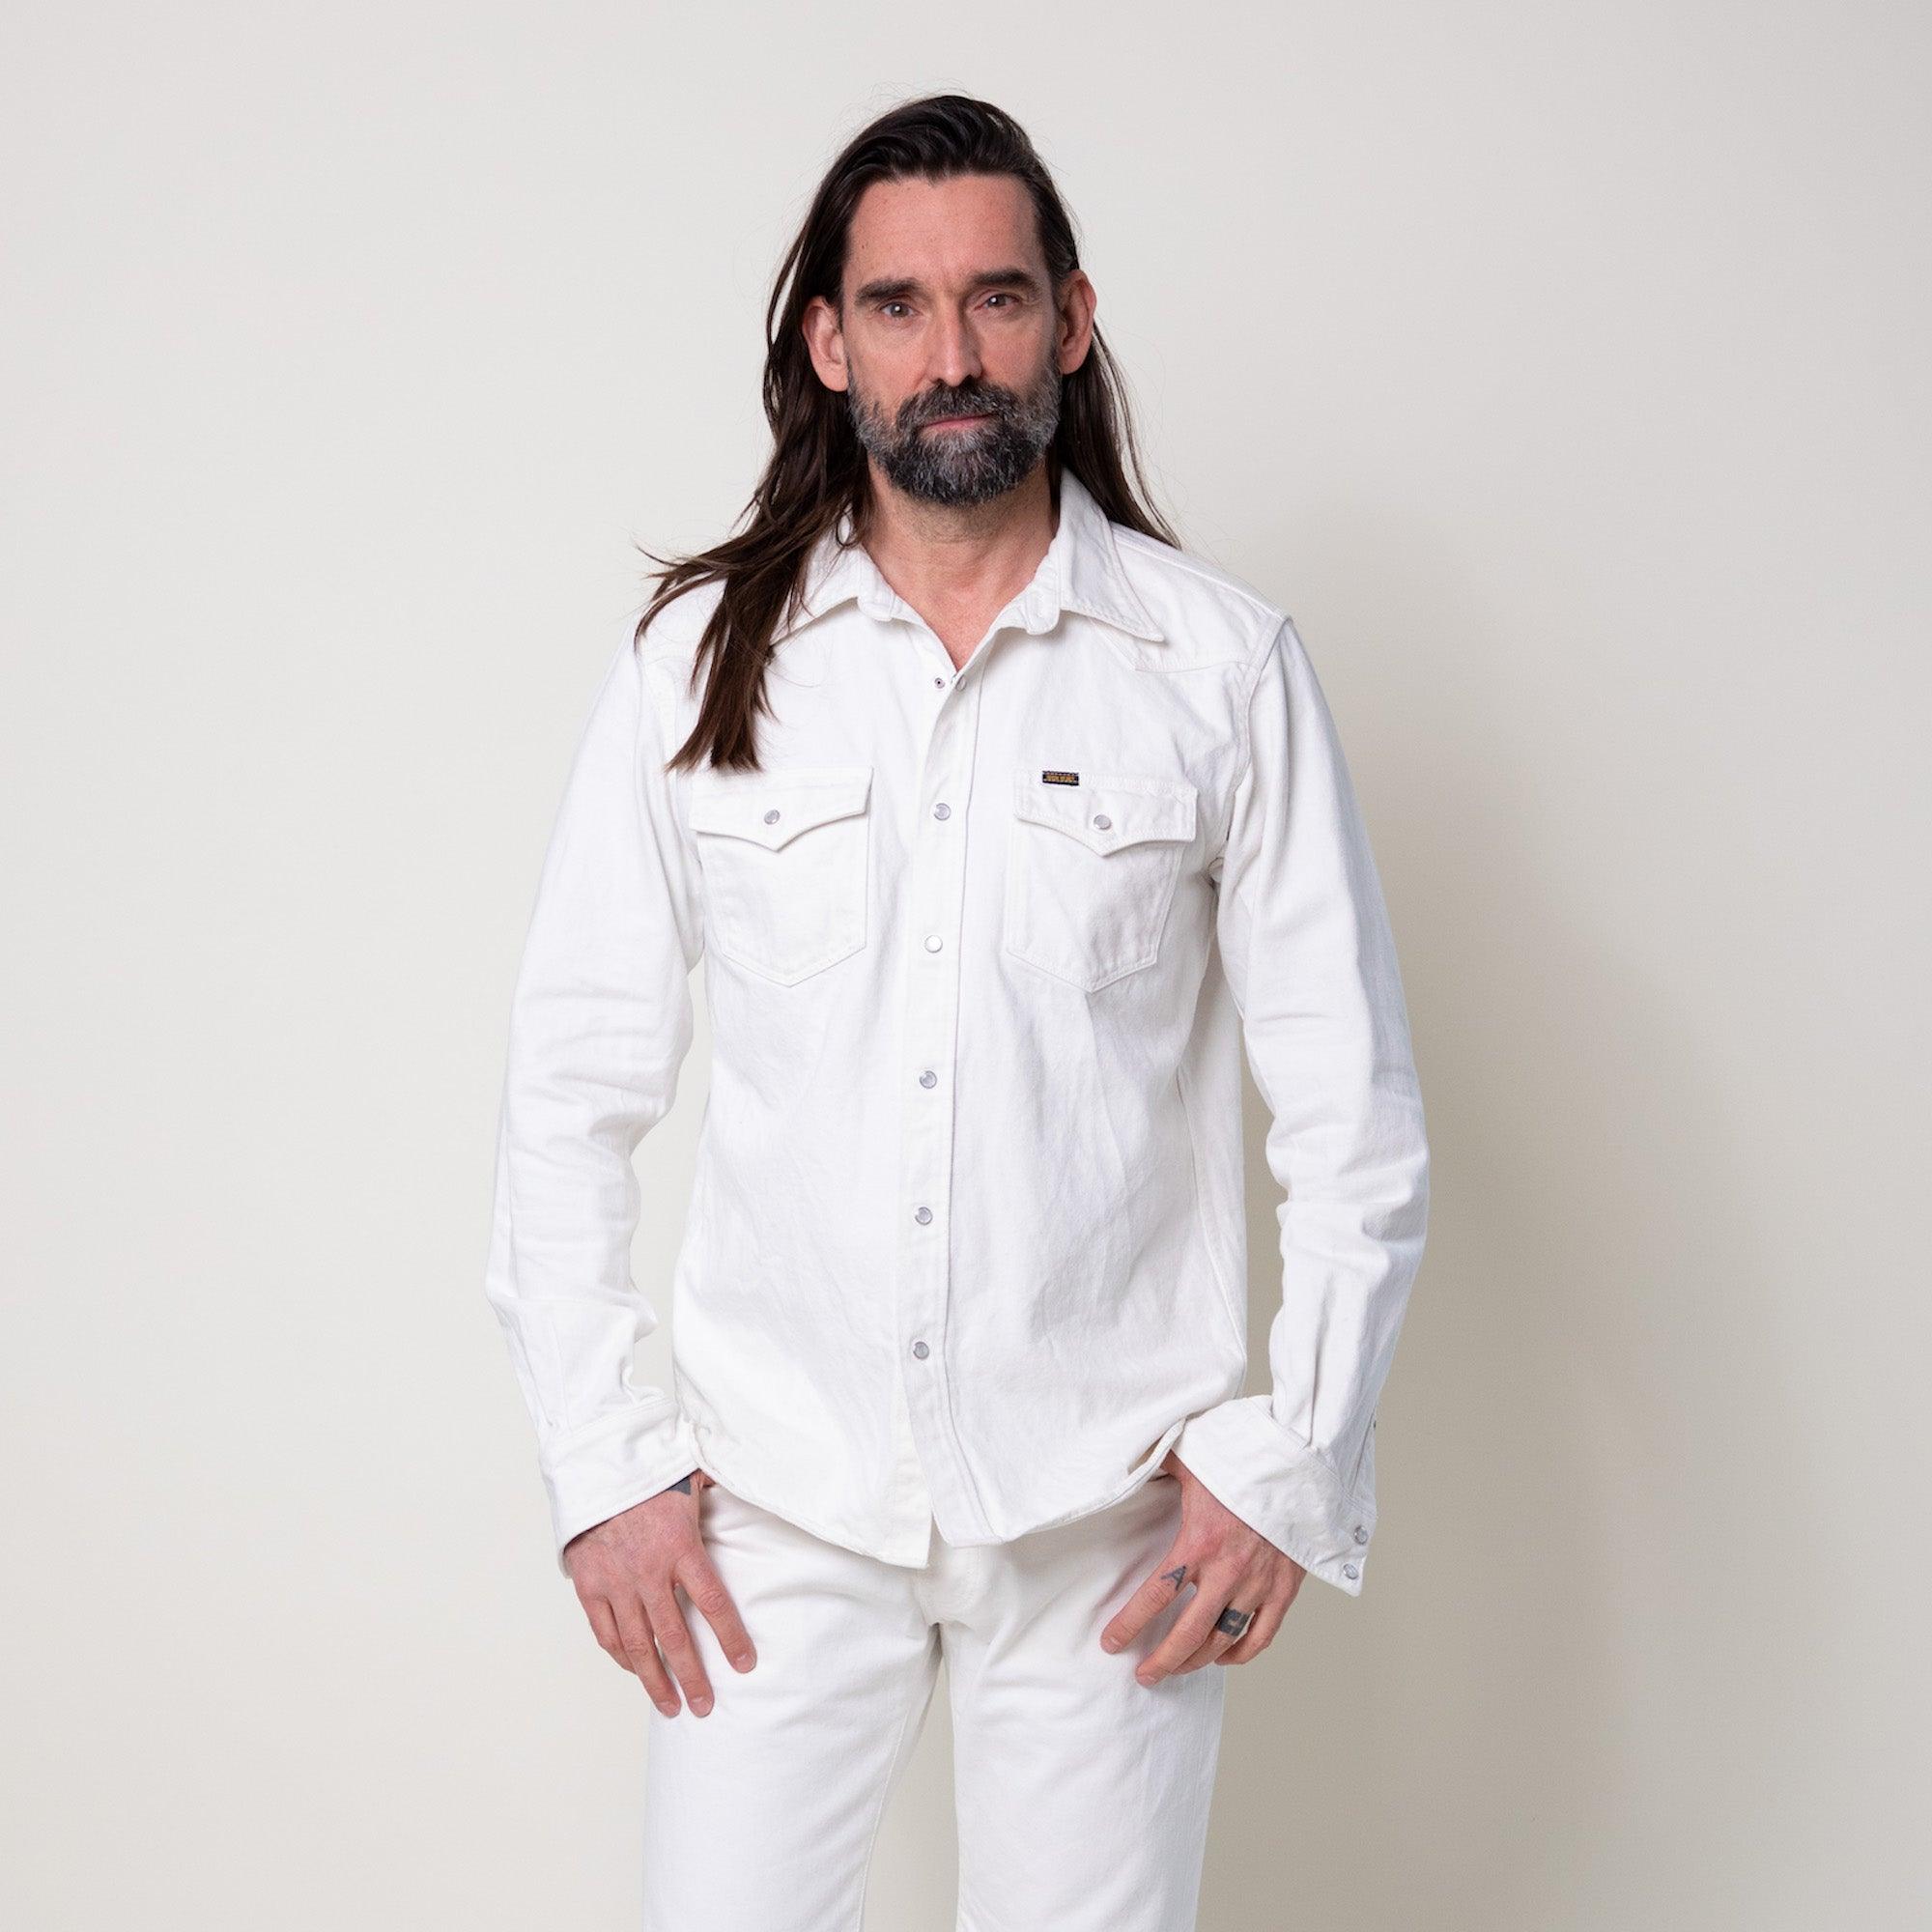 Image showing the IHSH-384-WHT - 13.5oz Cotton Twill Western Shirt - White which is a Shirts described by the following info SS24 and sold on the IRON HEART GERMANY online store